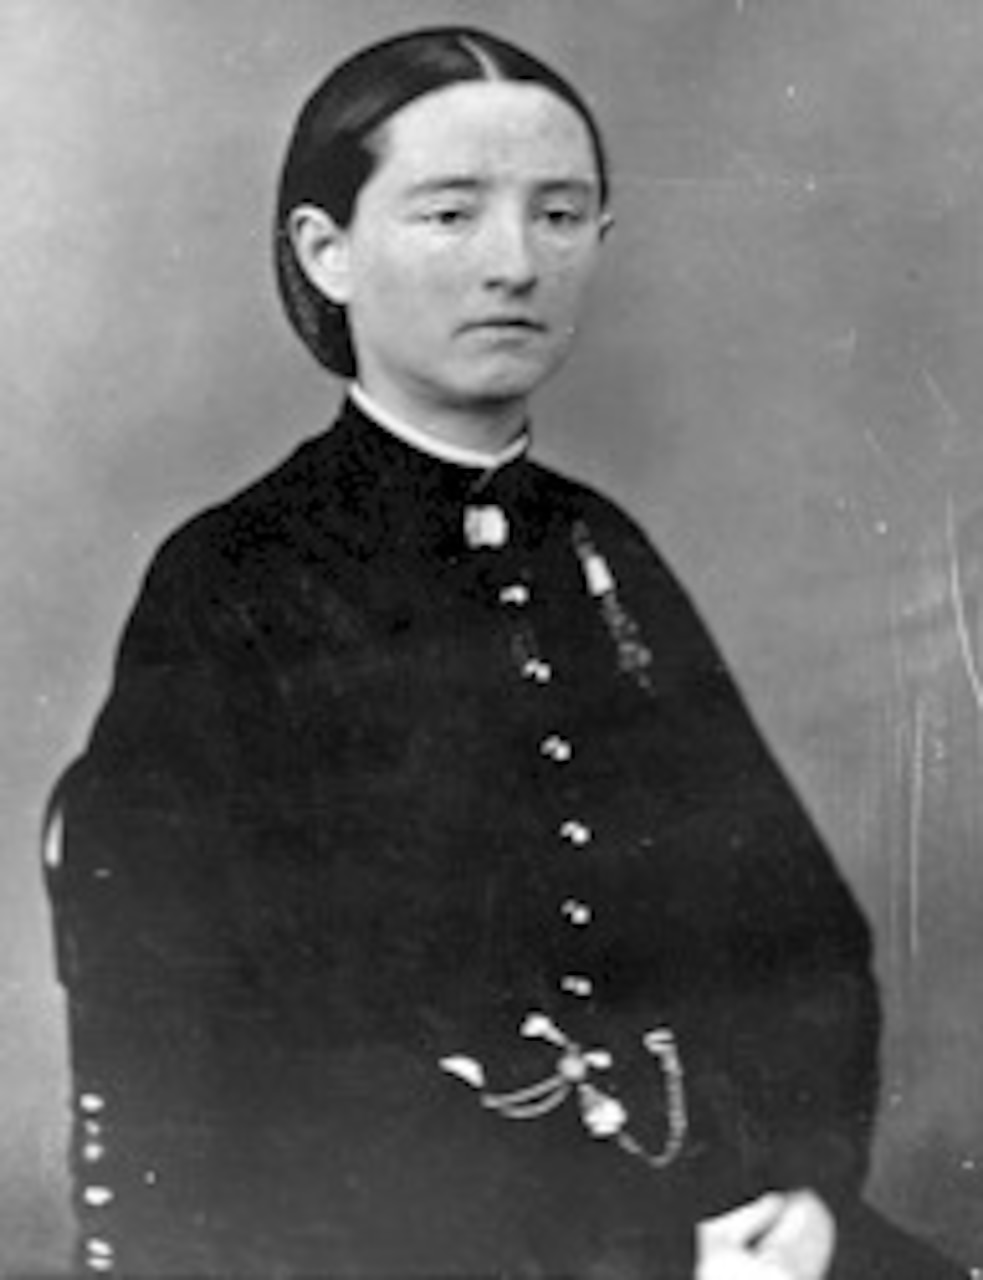 Dr. Mary Walker served as a surgeon on the Civil War battlefields of Manassas and Fredericksburg, Virginia. She is the only woman ever awarded the Medal of Honor. Photo courtesy of U.S. Center for Military History